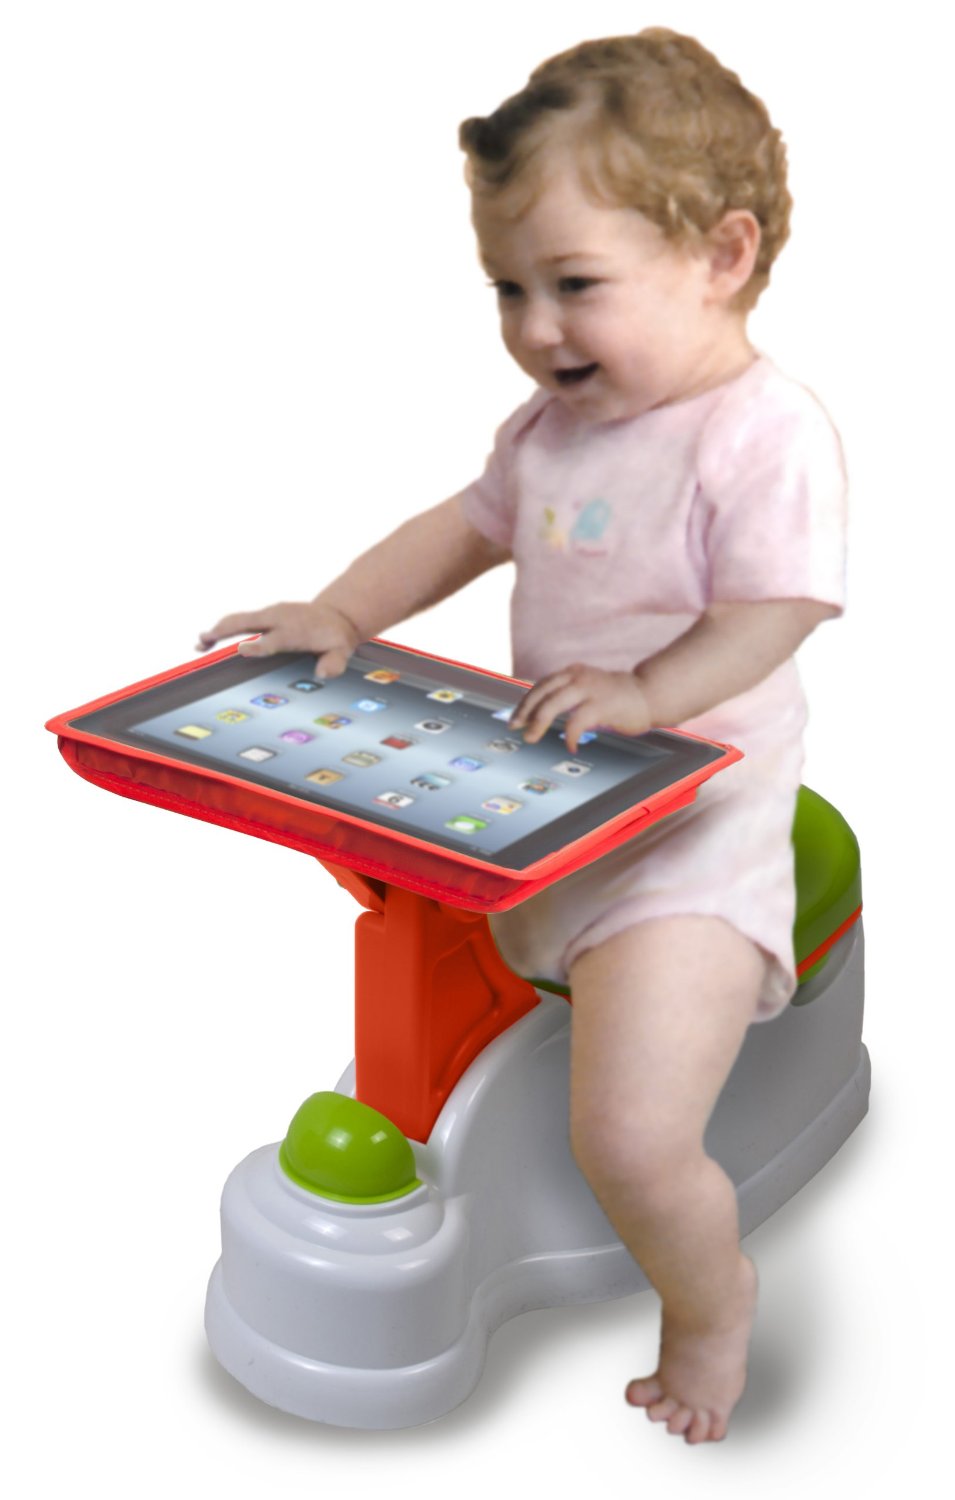 This iPad Child Potty Represents Everything Wrong With America